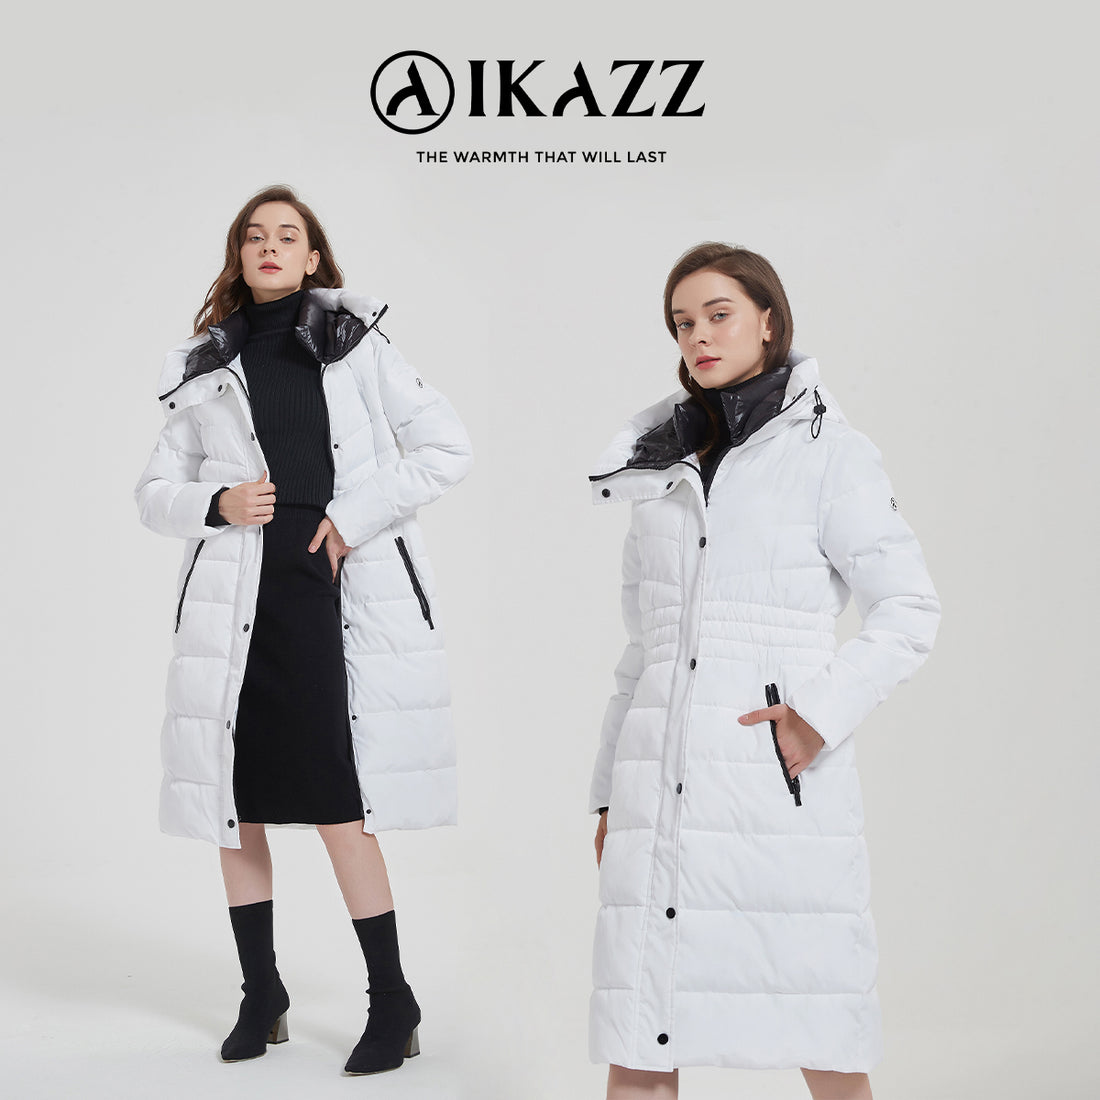 The Ultimate Winter Wardrobe Staple: Discover the Stylish Benefits of IKAZZ's Long Puffer Jackets for Women